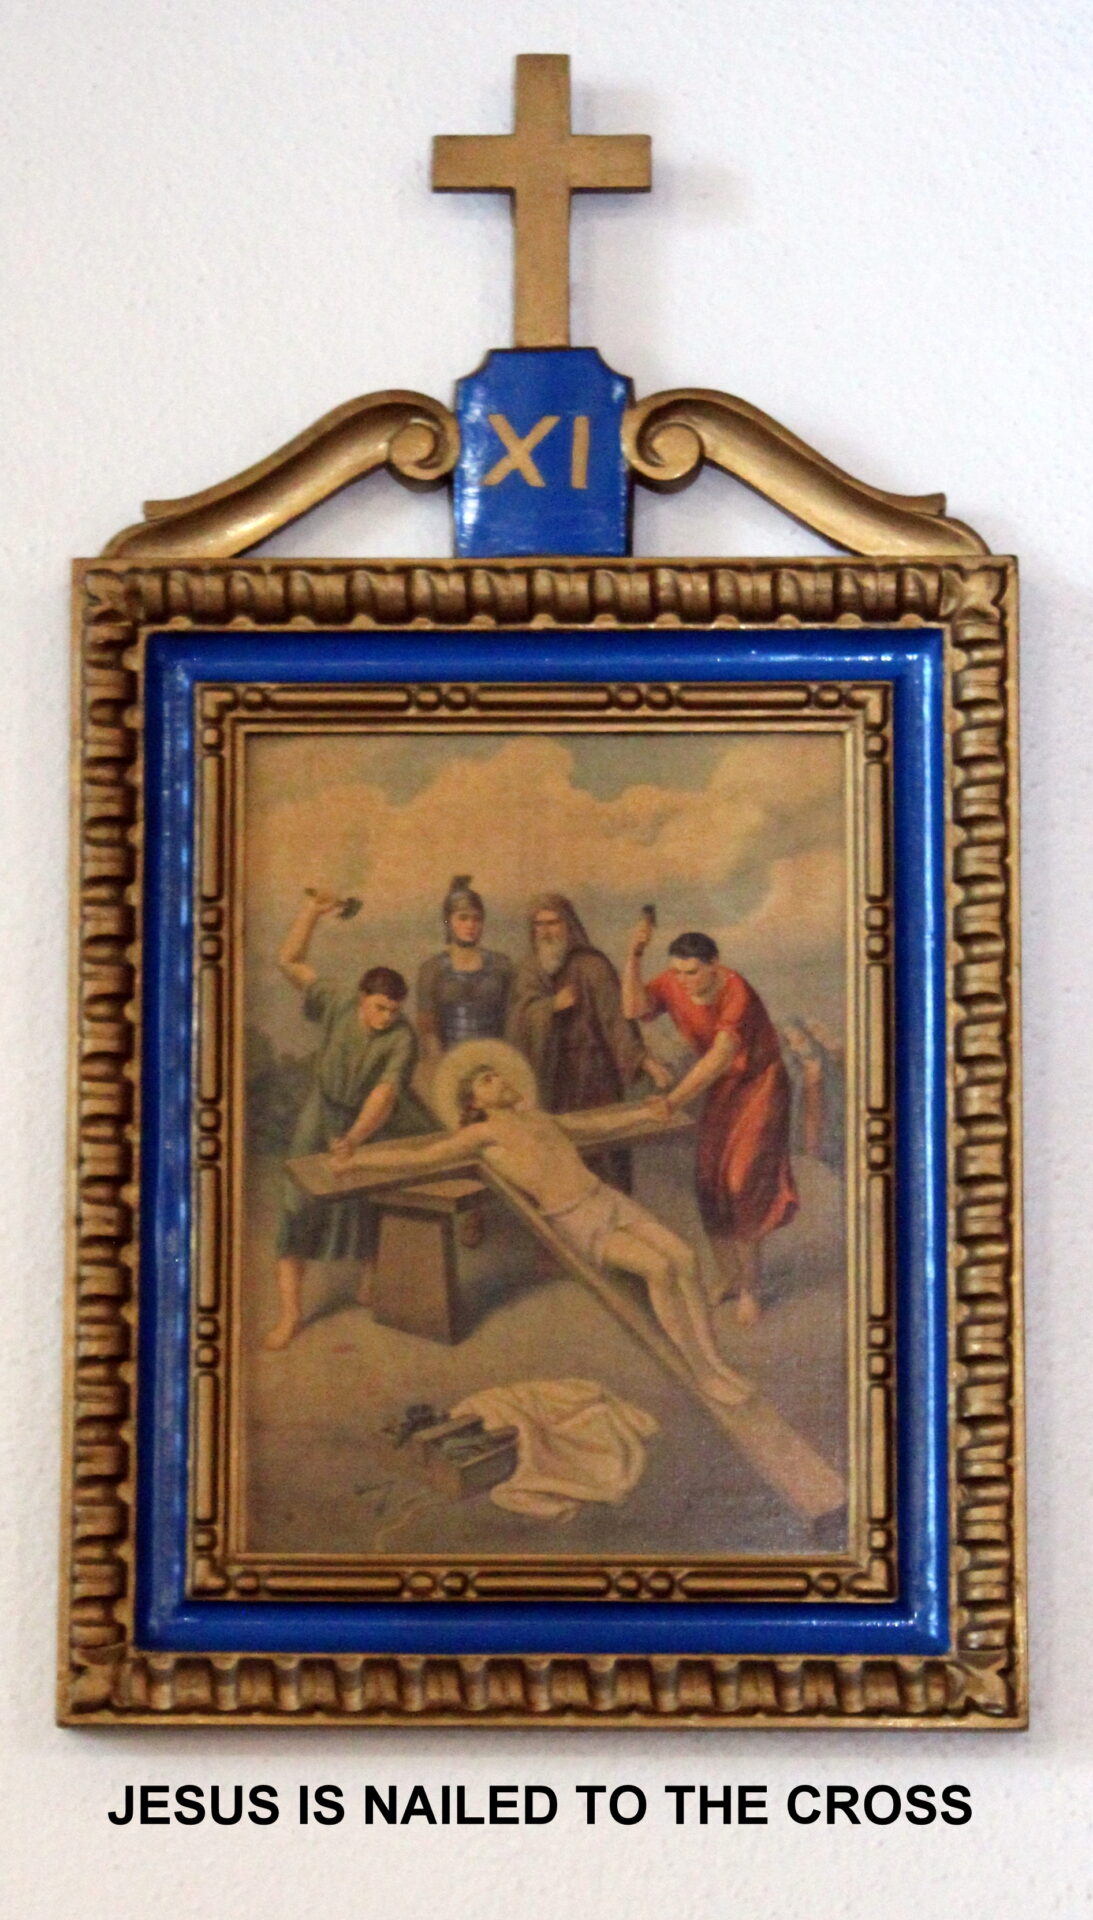 The 11th chapter of the station of the cross